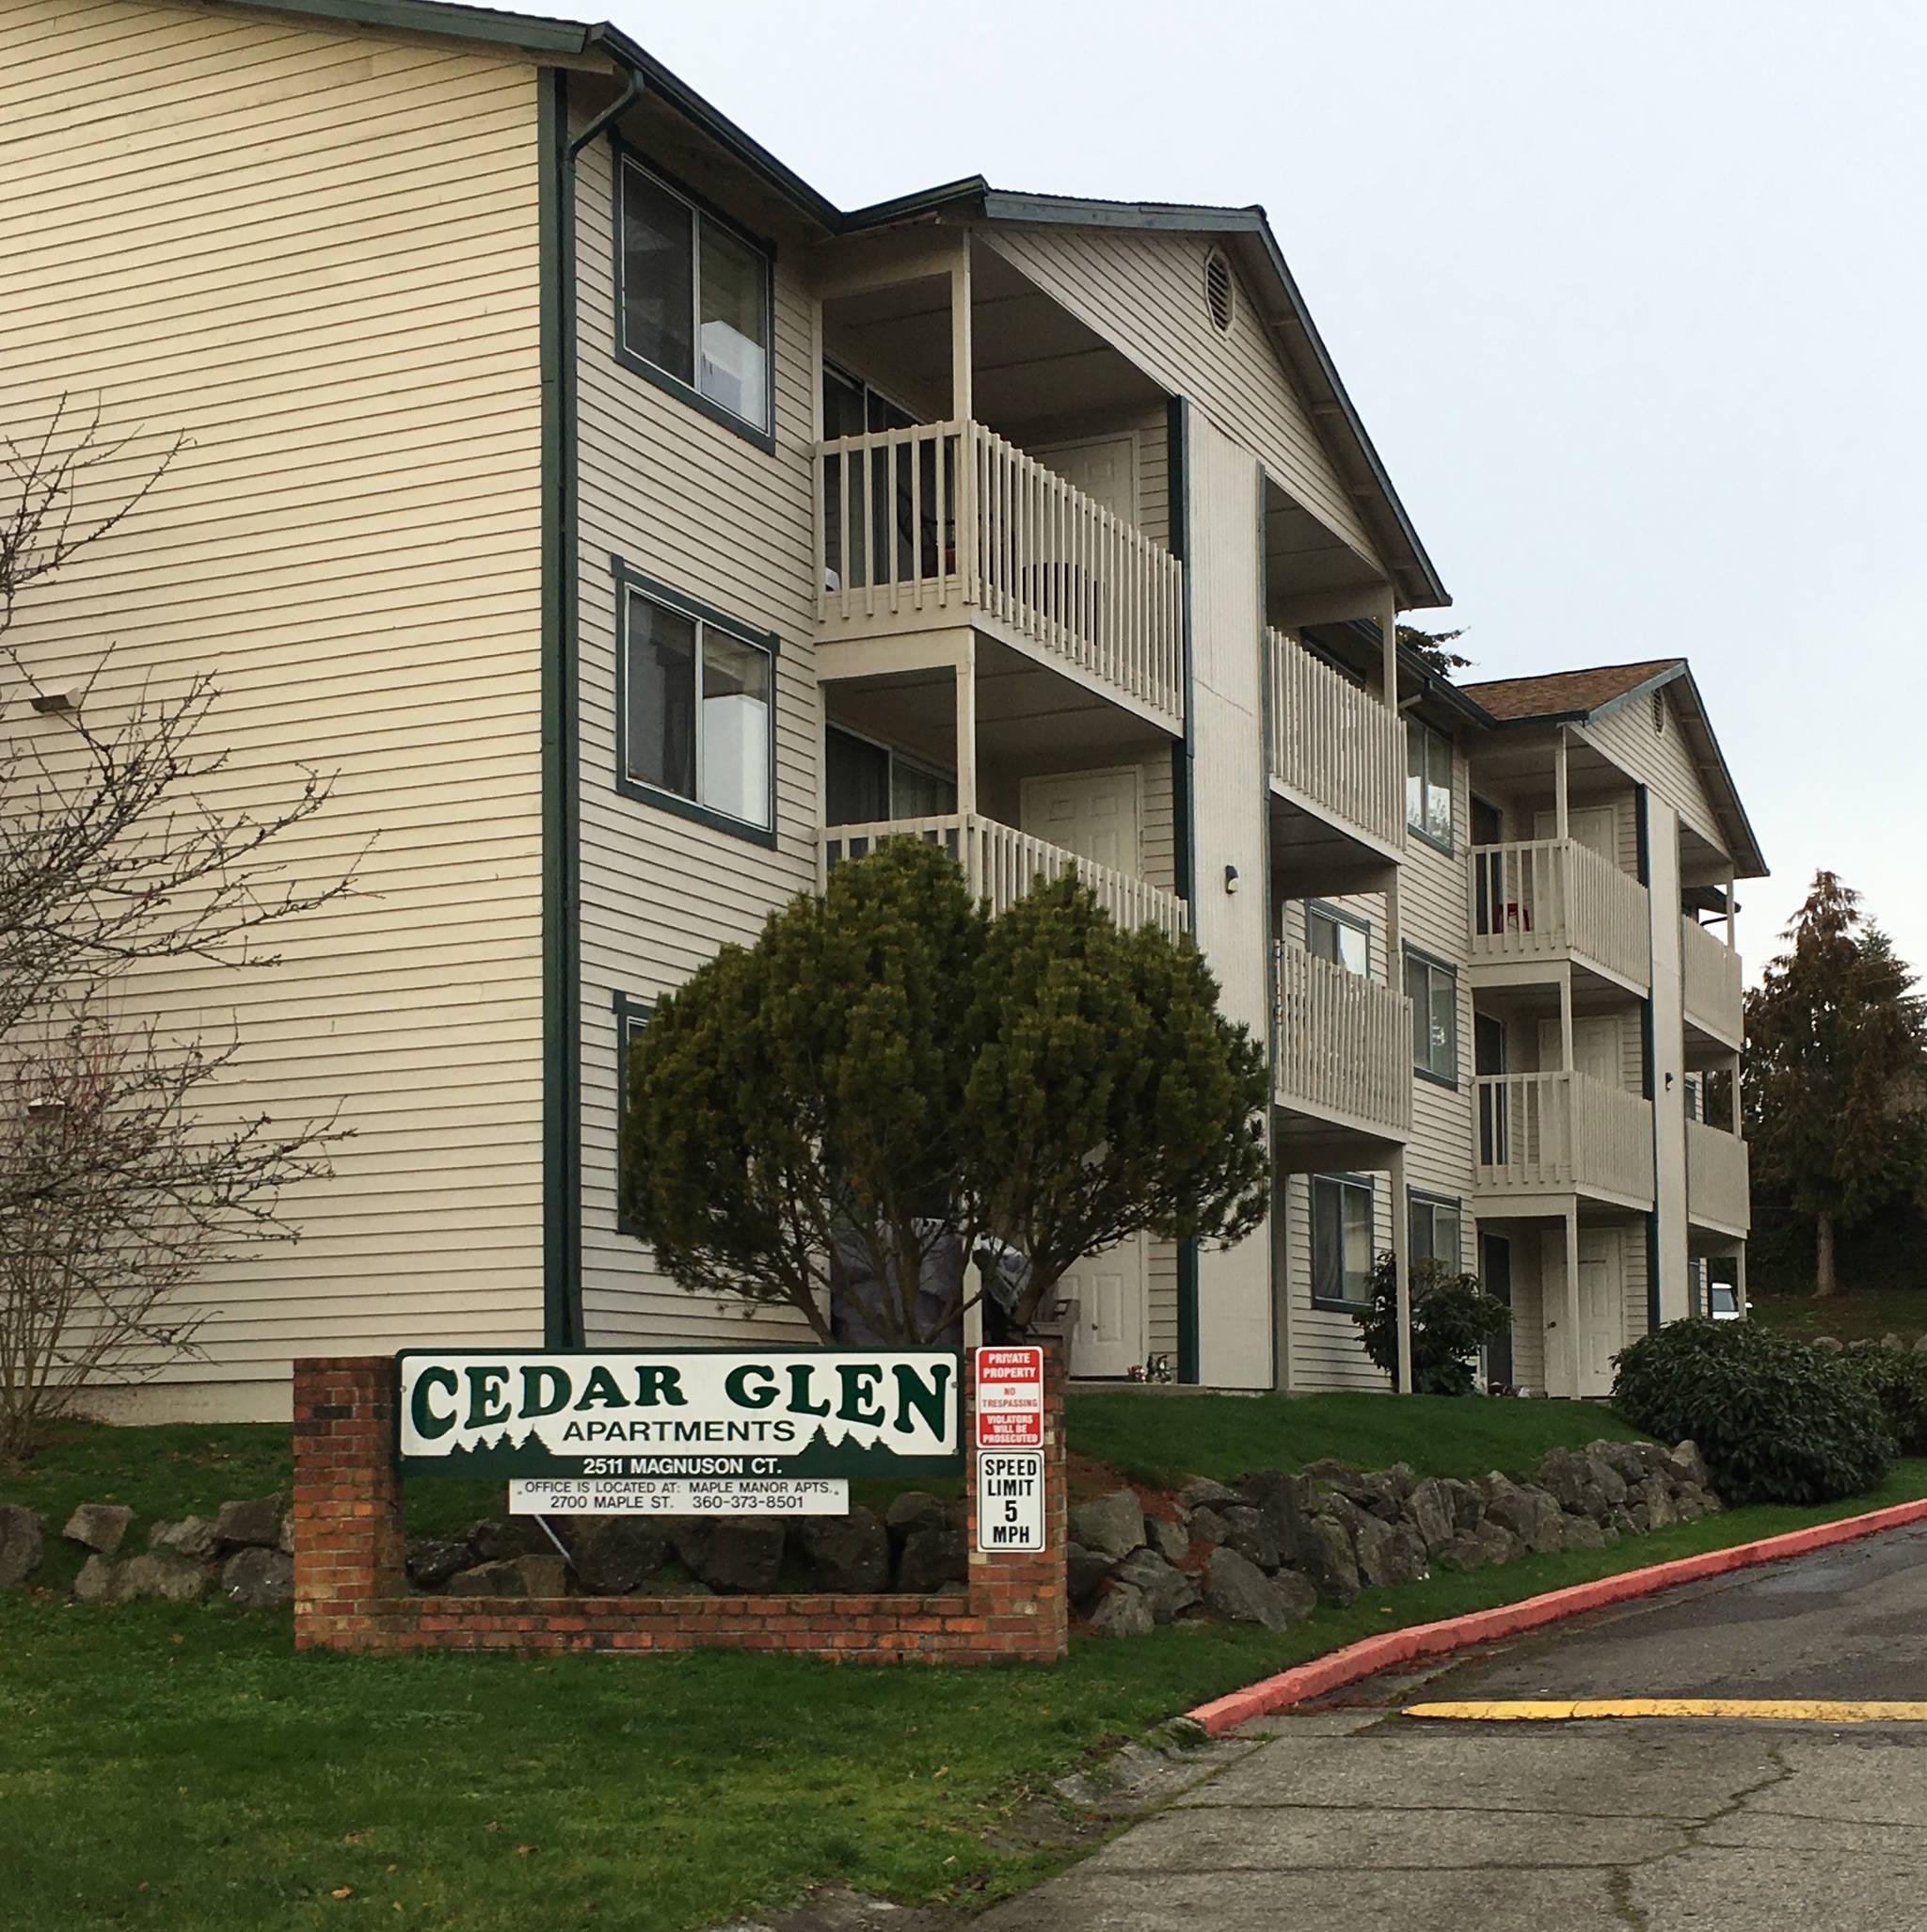 For thousands in Bremerton, paying the rent takes winning a lottery